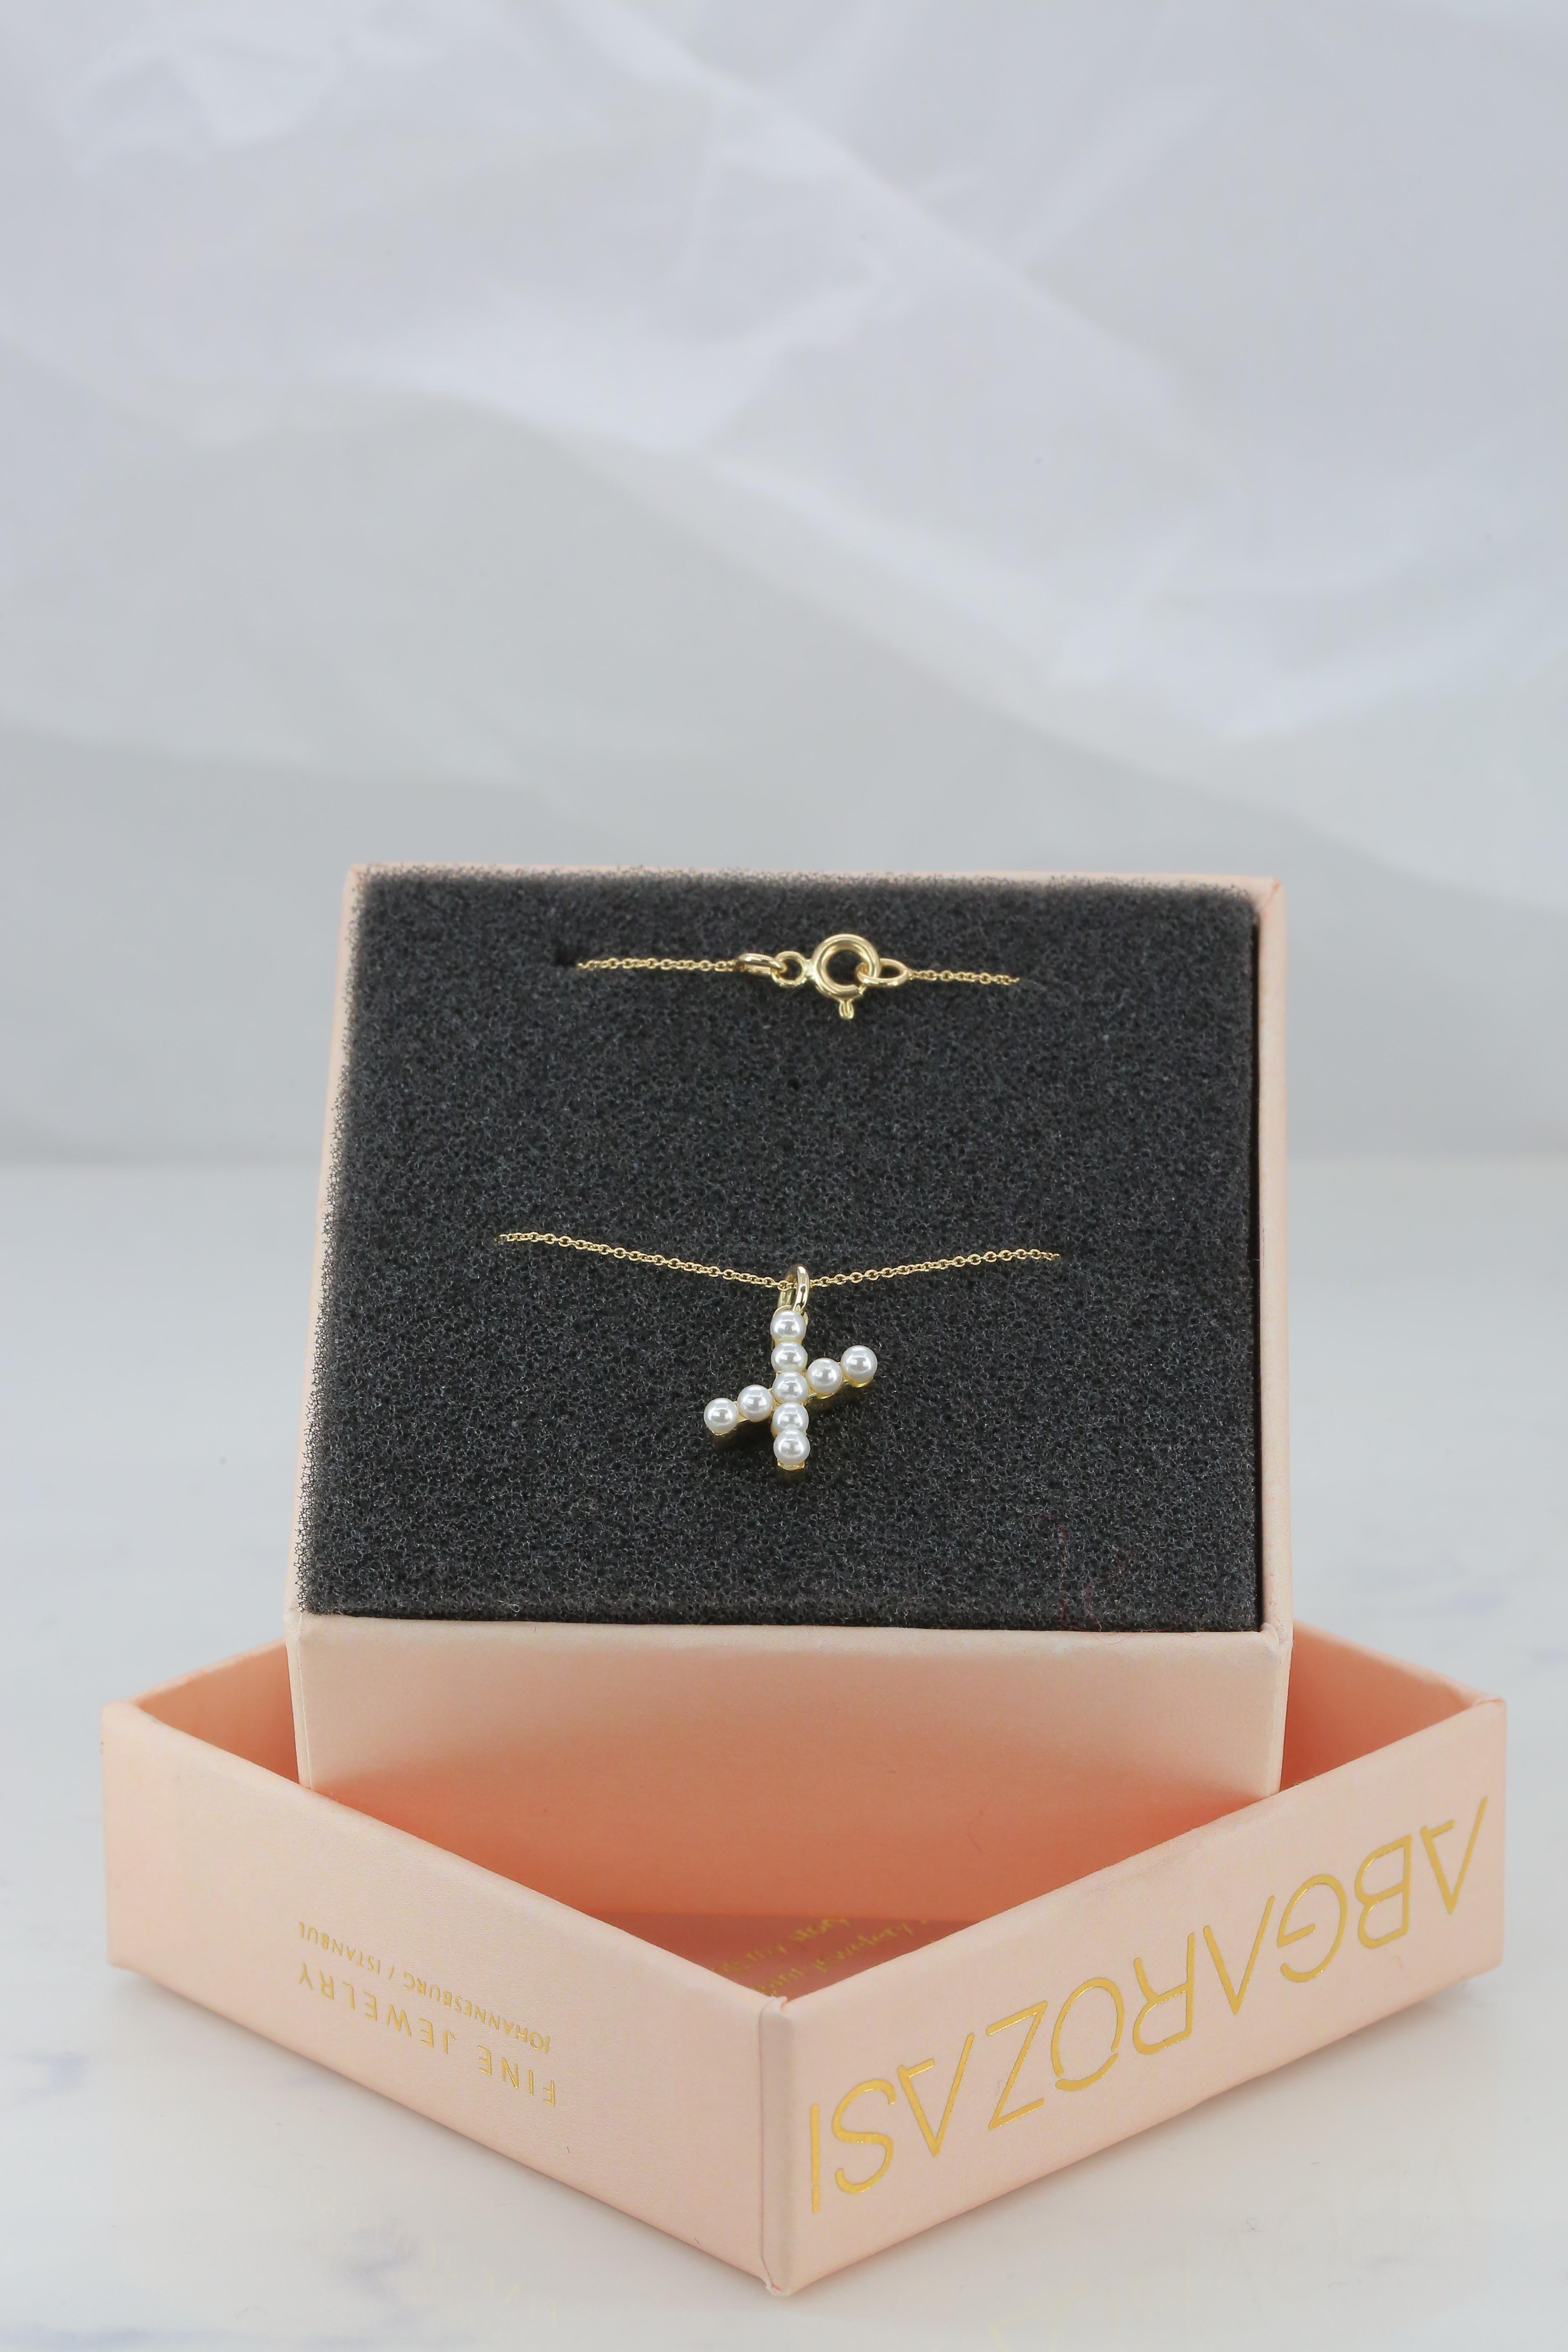 x initial necklace